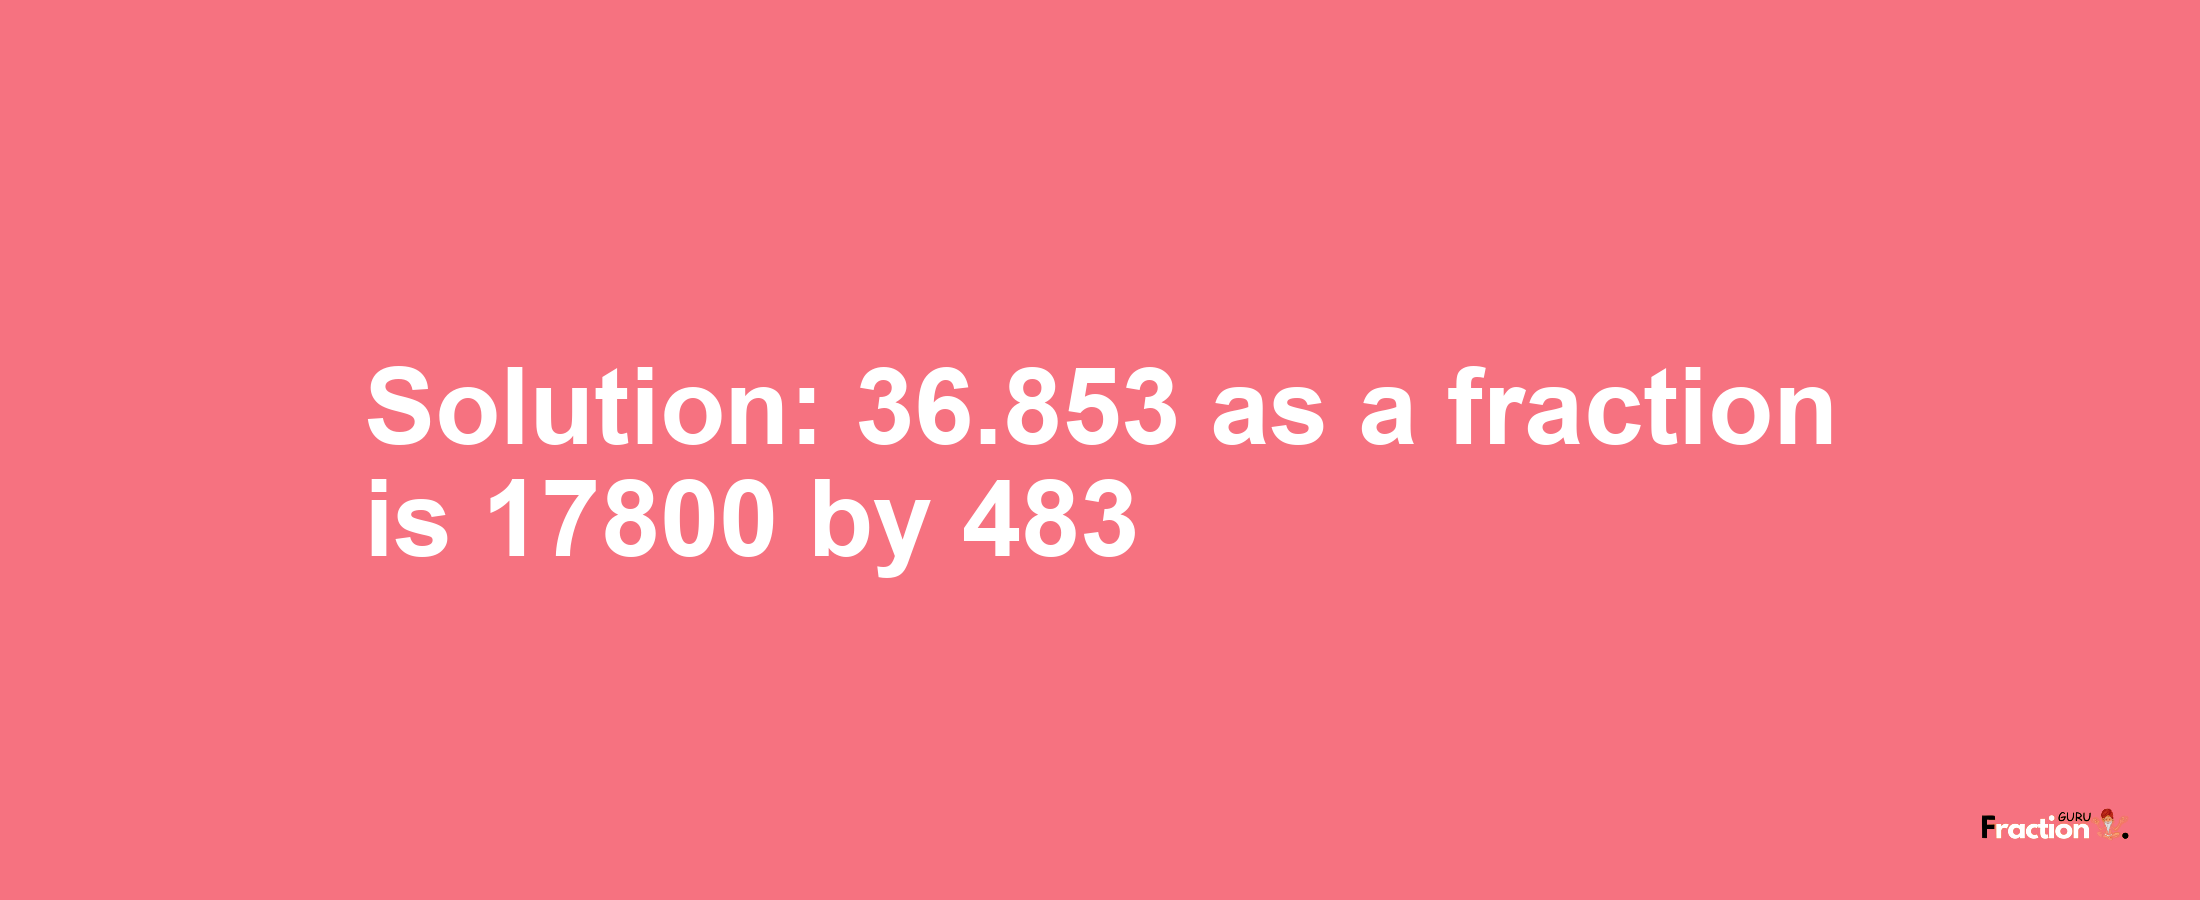 Solution:36.853 as a fraction is 17800/483